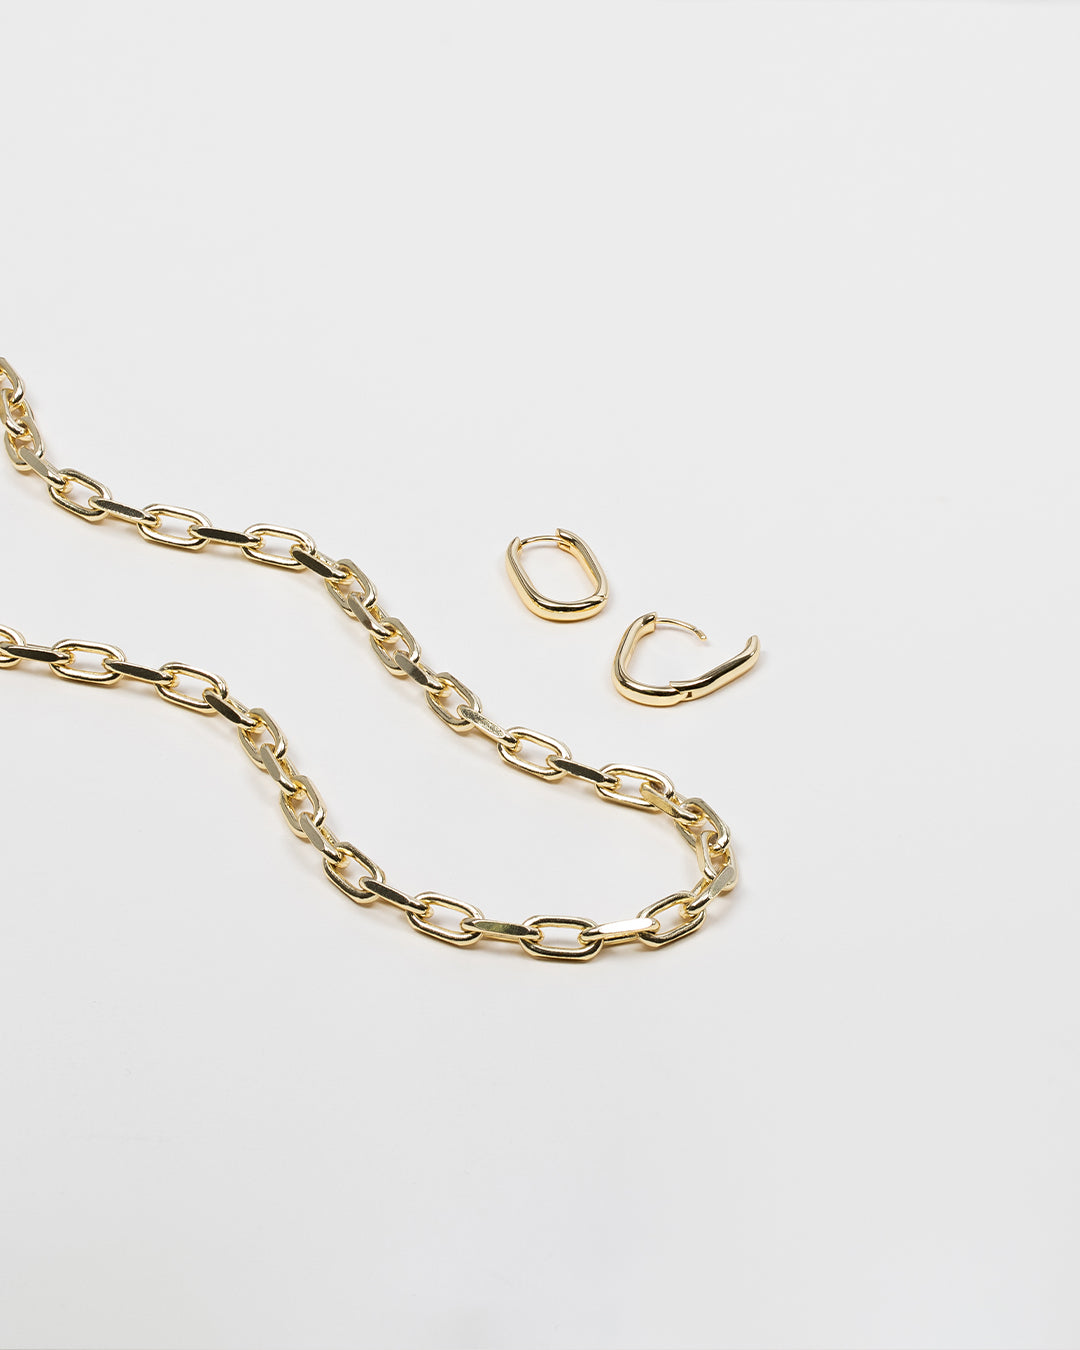 14k Gold Large Open Link Chain Necklace - Zoe Lev Jewelry